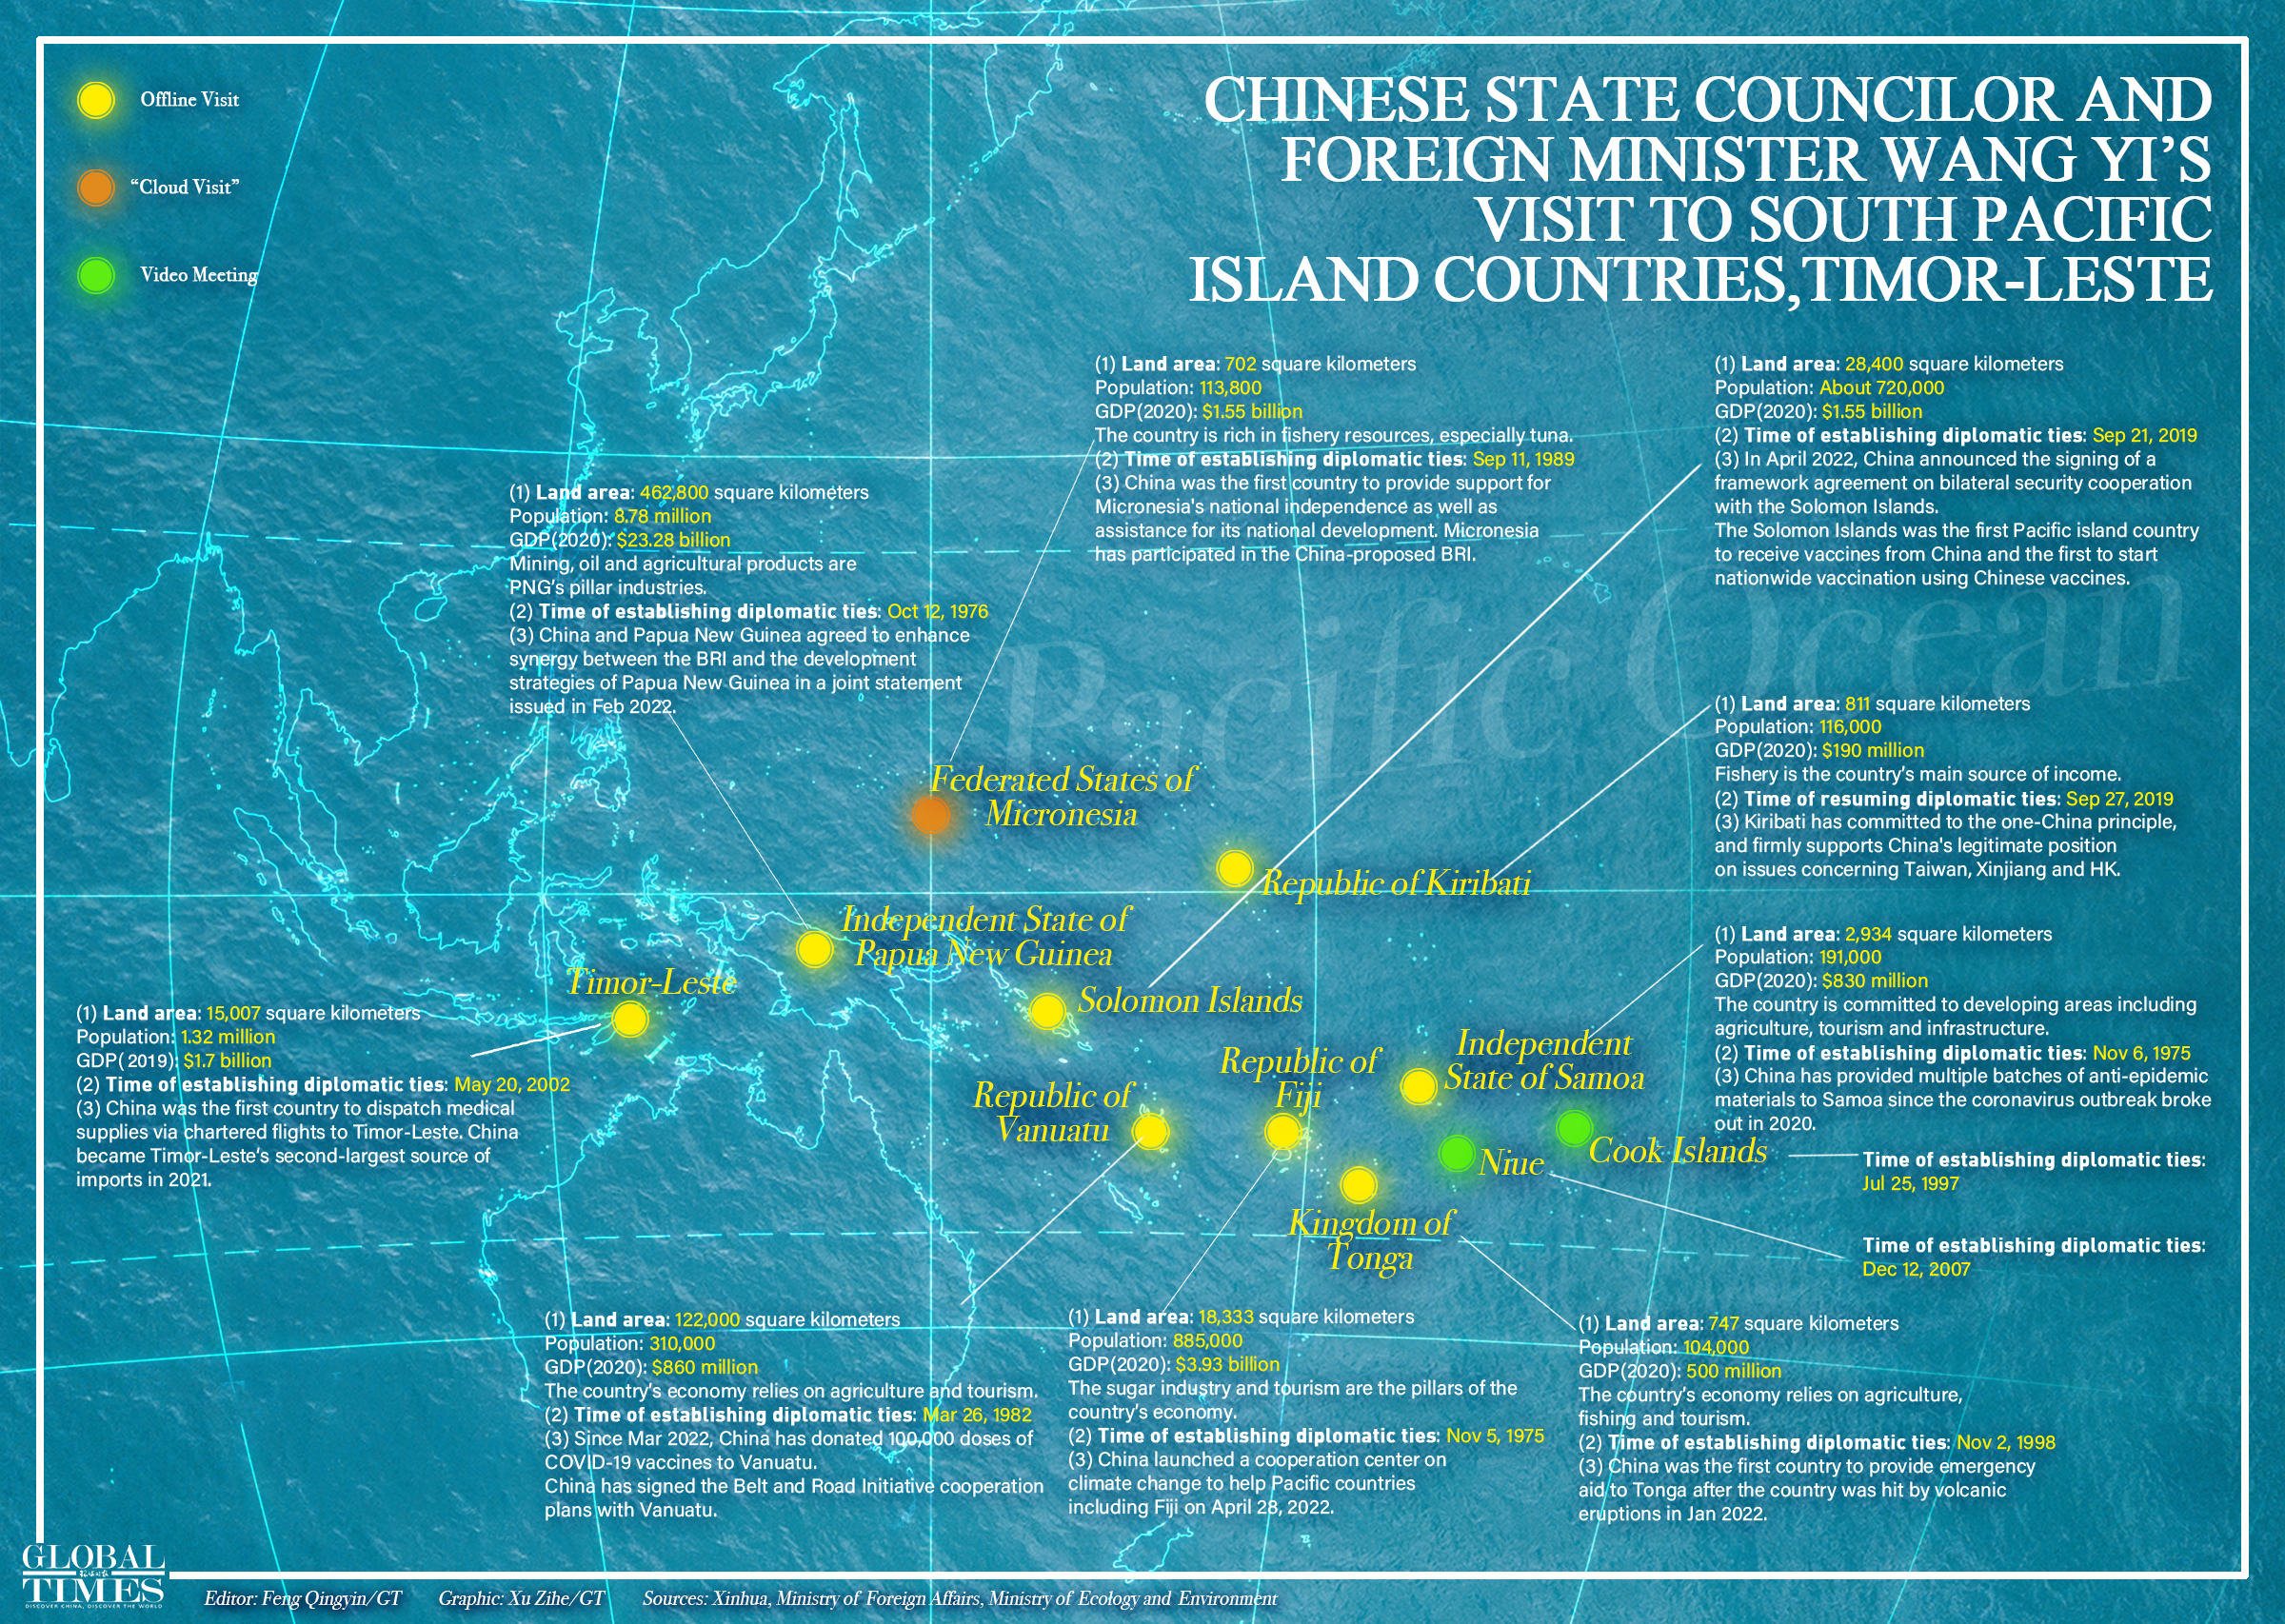 Chinese State Councilor and Foreign Minister Wang Yi’s visit to South Pacific island countries, Timor-Leste Editor: Feng Qingyin/GT Graphic: Xu Zihe/GT